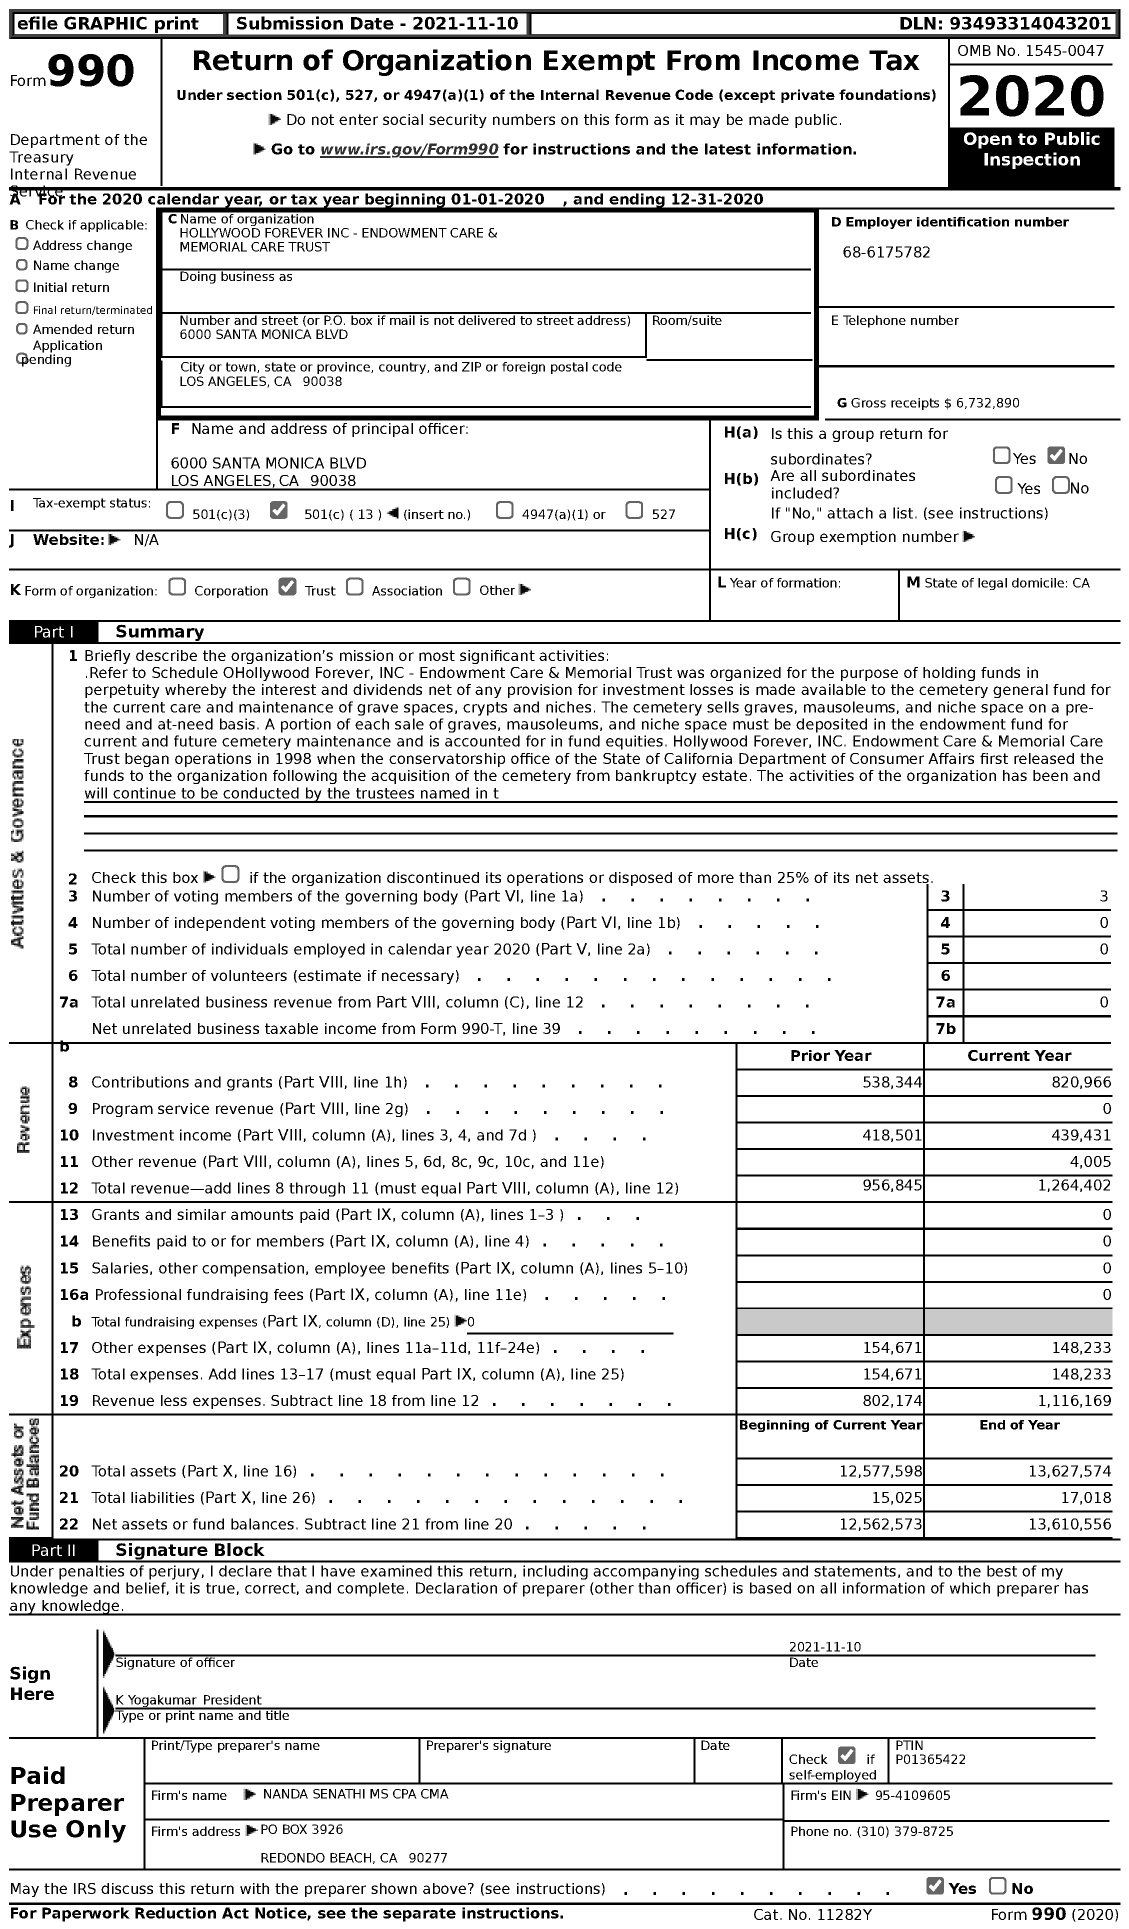 Image of first page of 2020 Form 990 for Hollywood Forever - Endowment Care and Memorial Care Trust